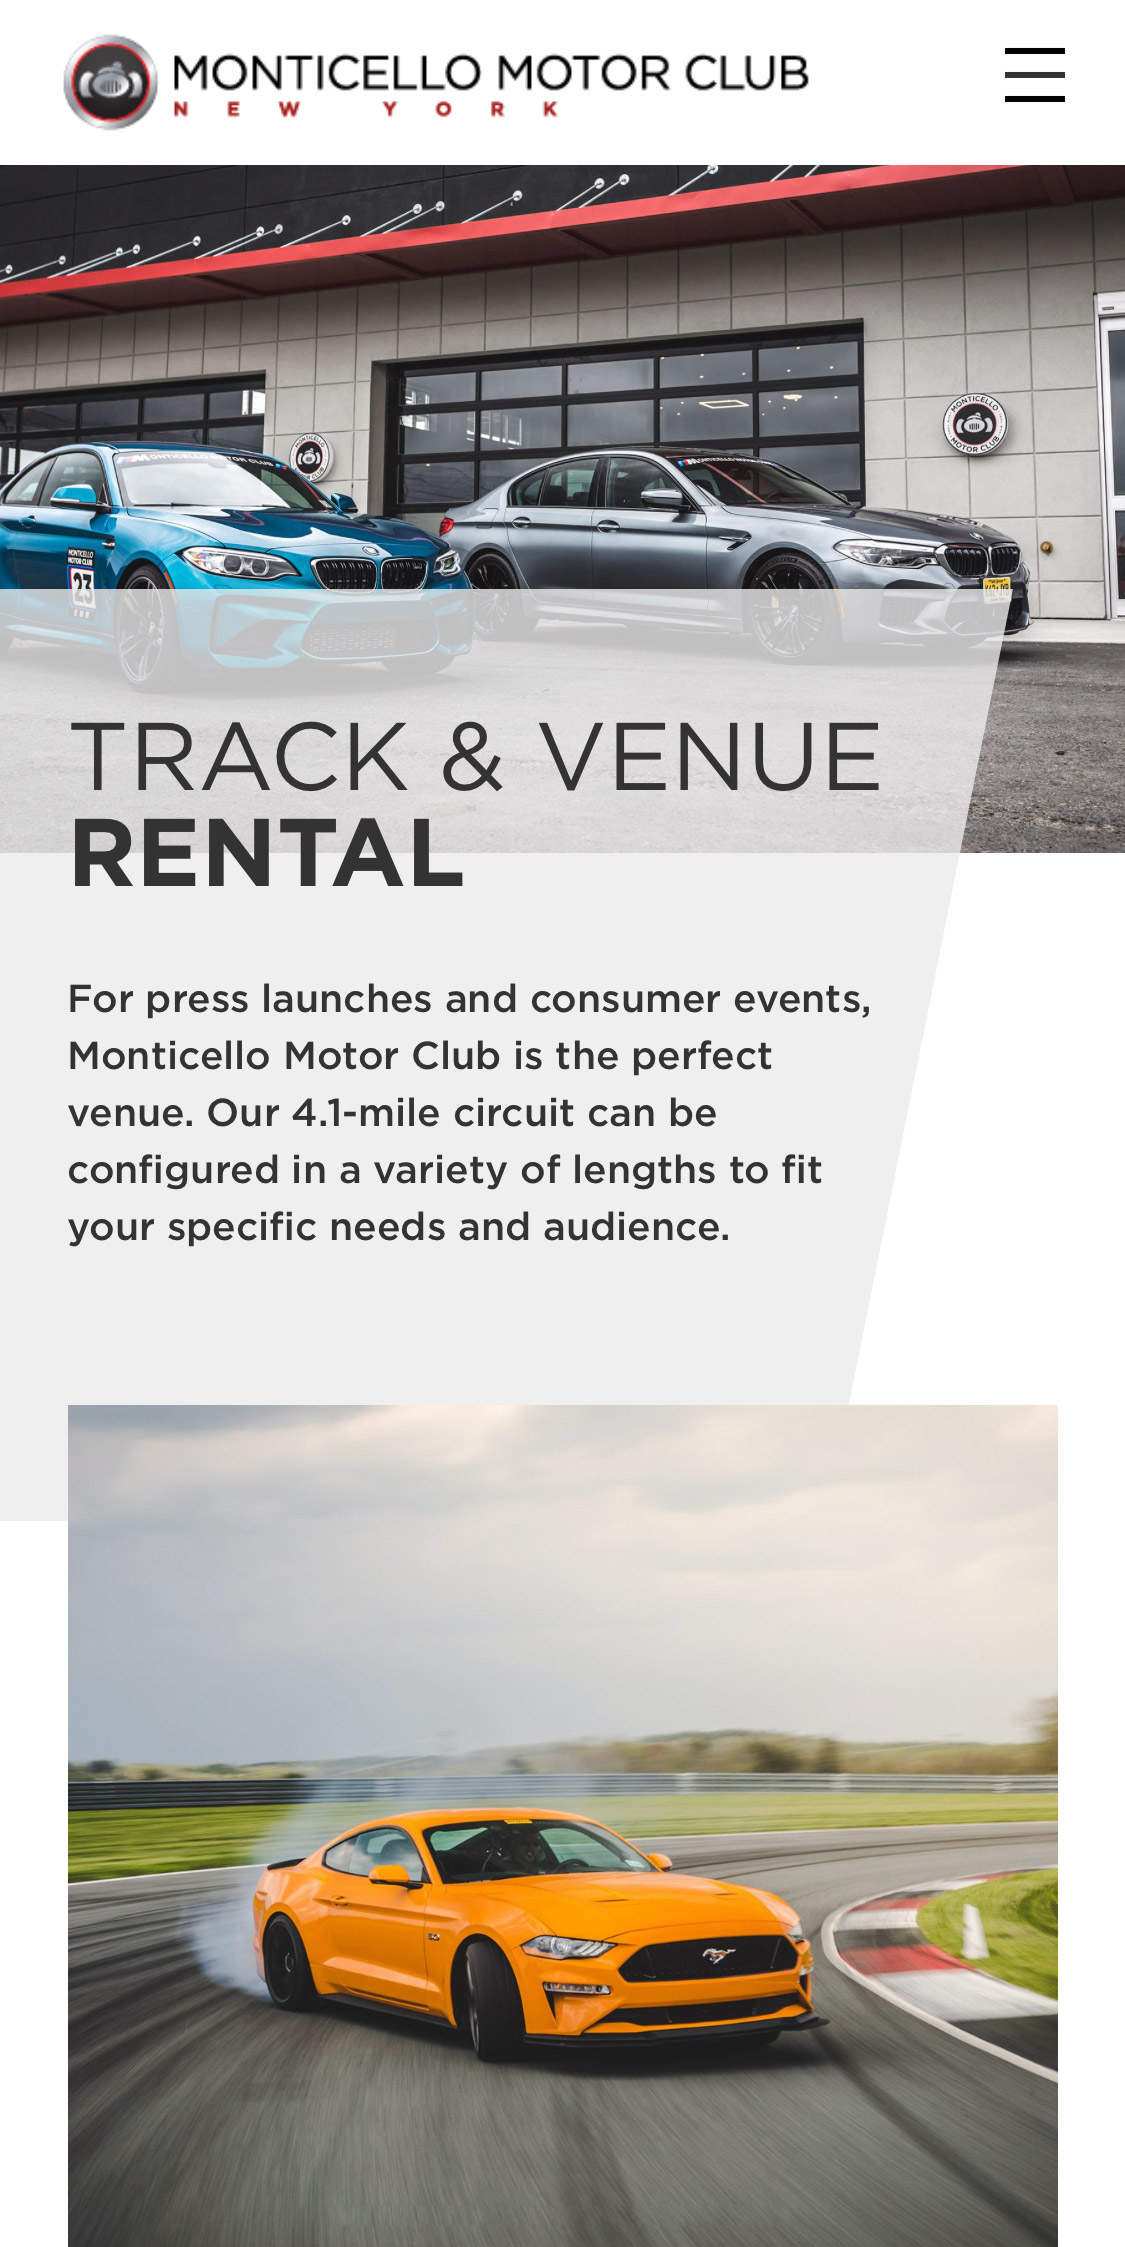 A screenshot of the MMC website mobile Track & Venue Rental page